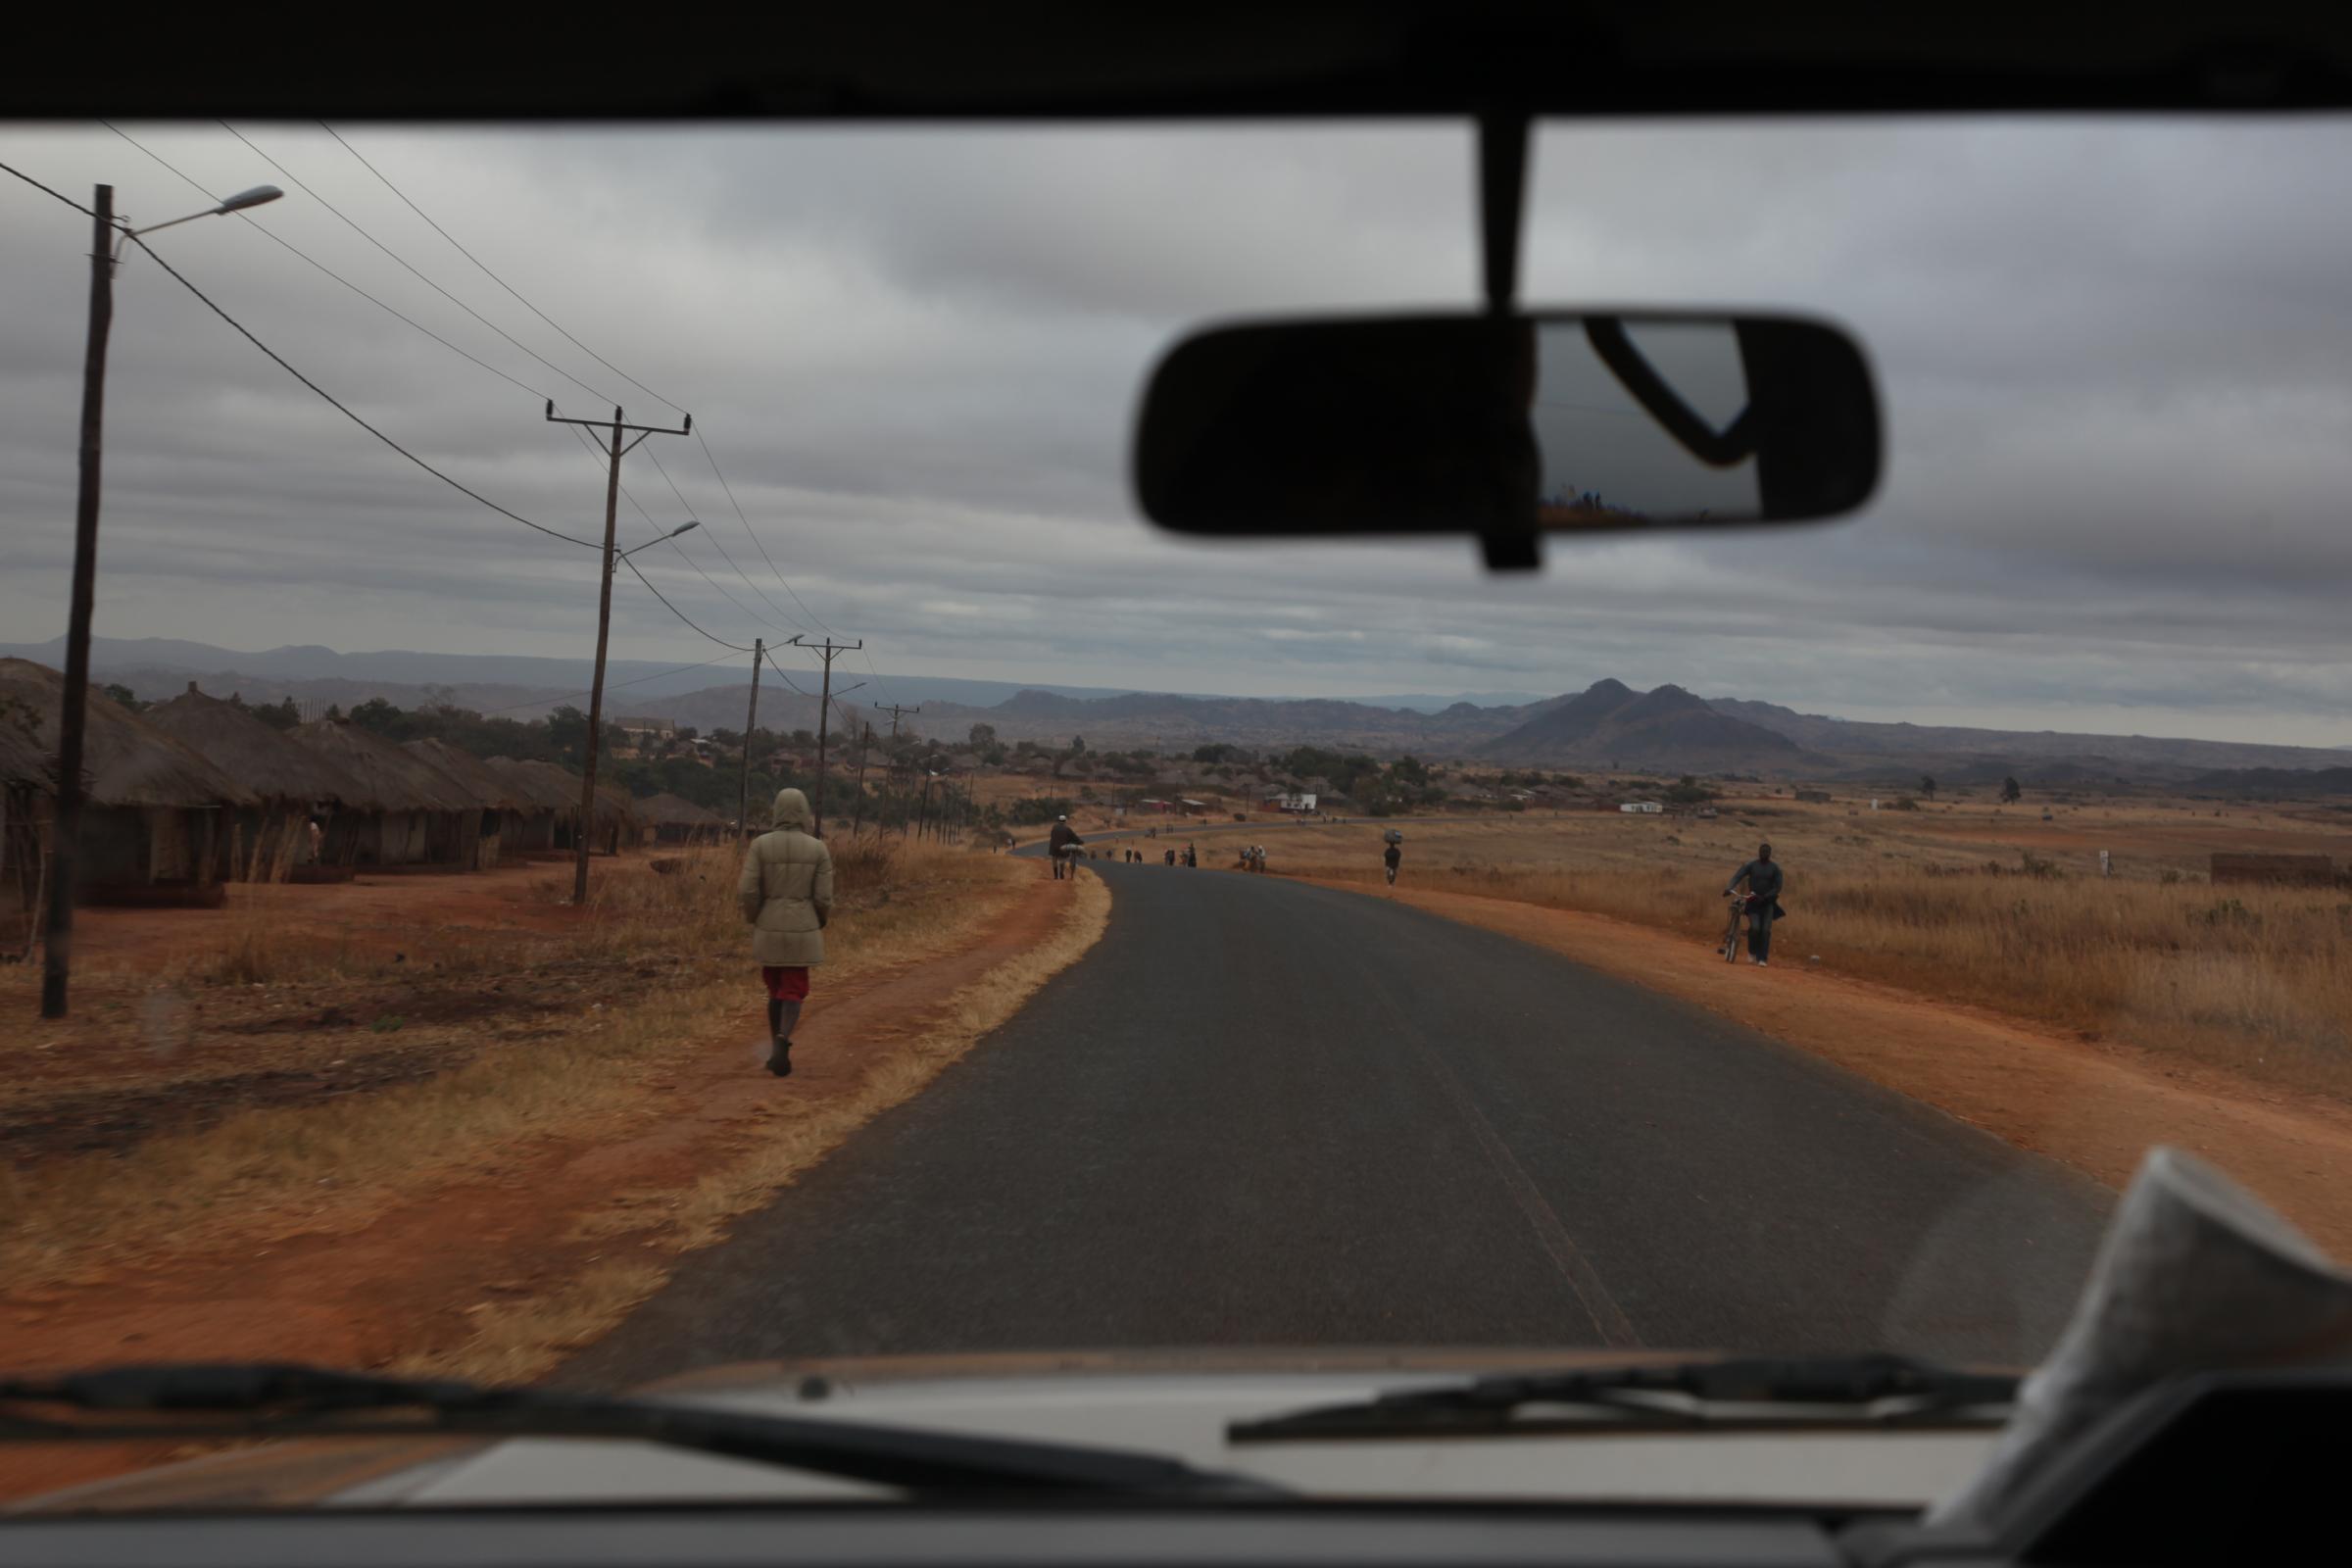 Road - Mozambique, 26 of July, 2009
Niassa Province.
Photo by...